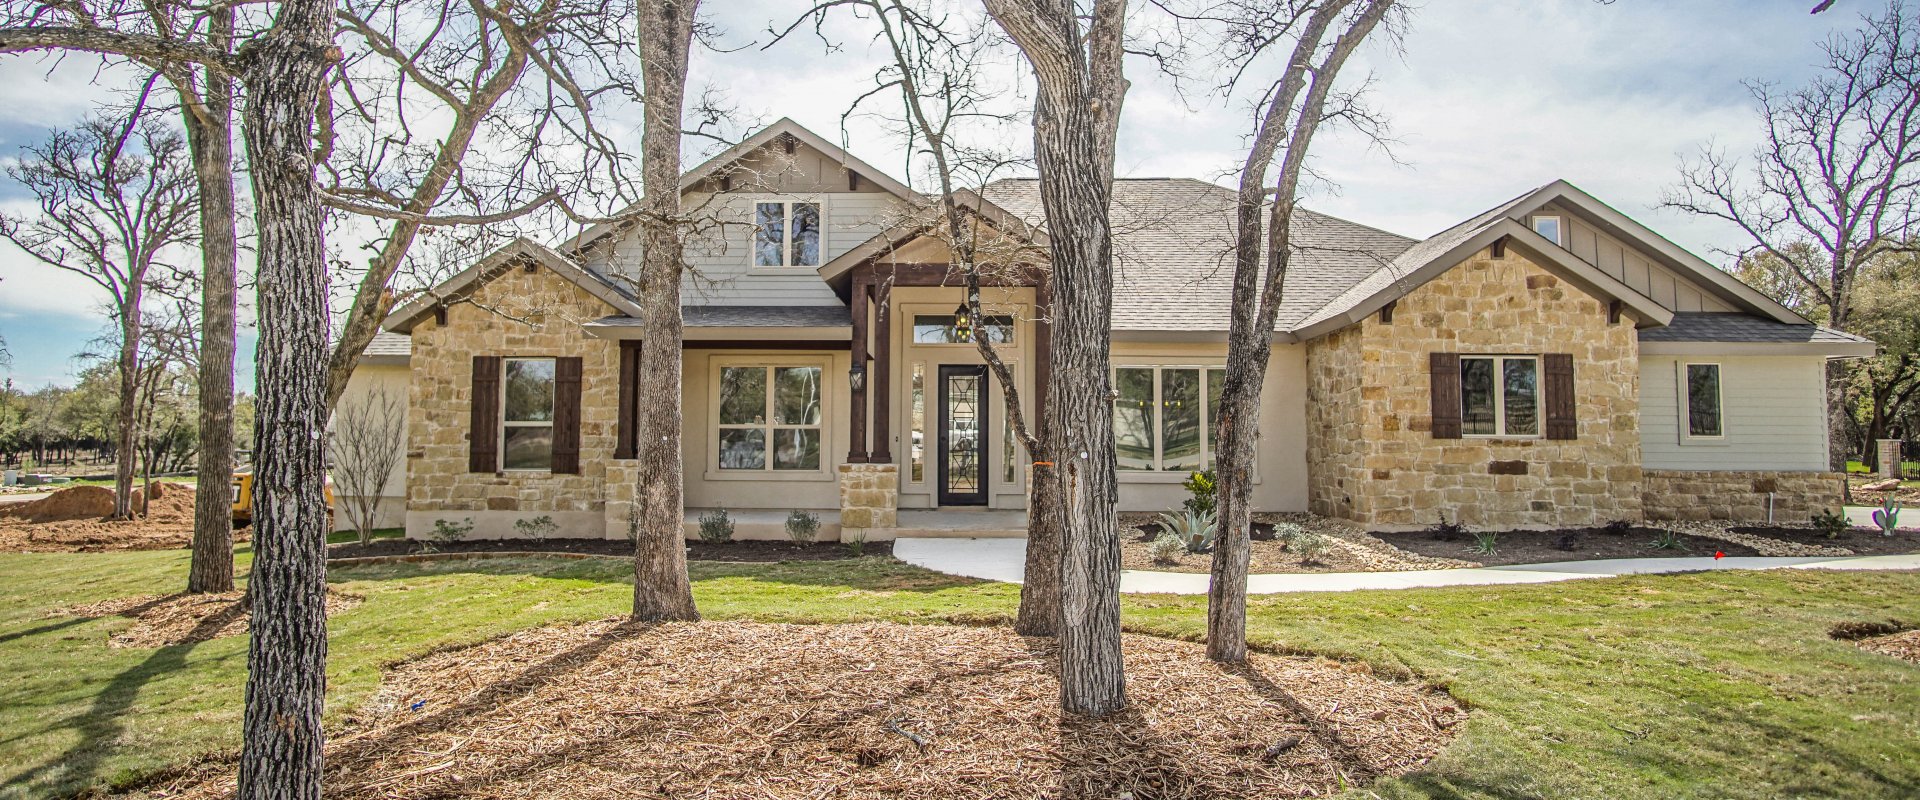 Homes for Sale New Braunfels